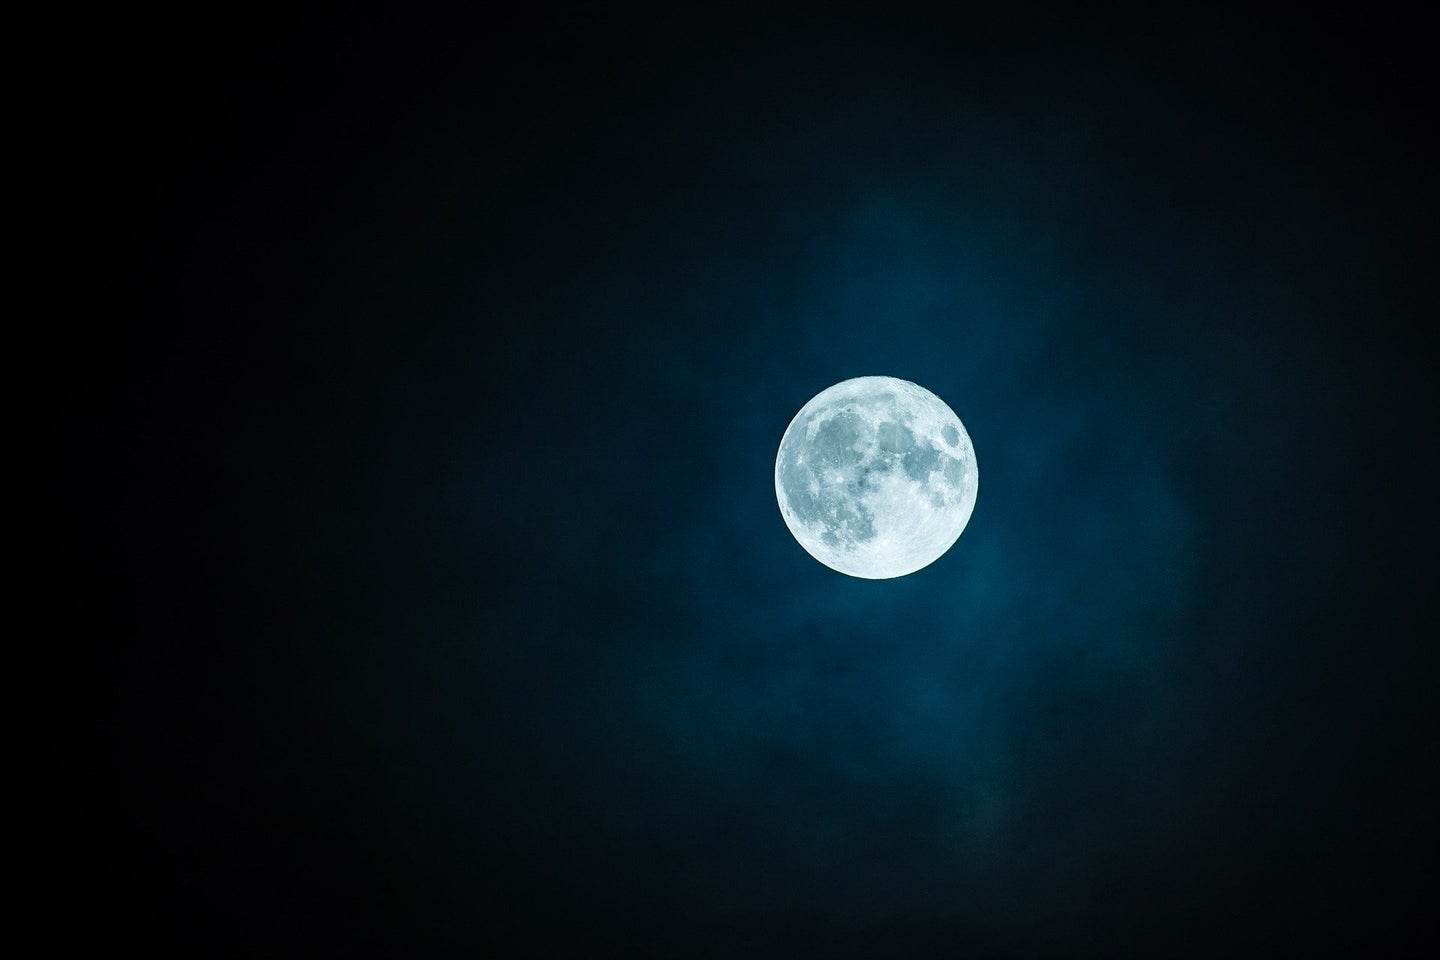 A full moon in the night sky with no stars.